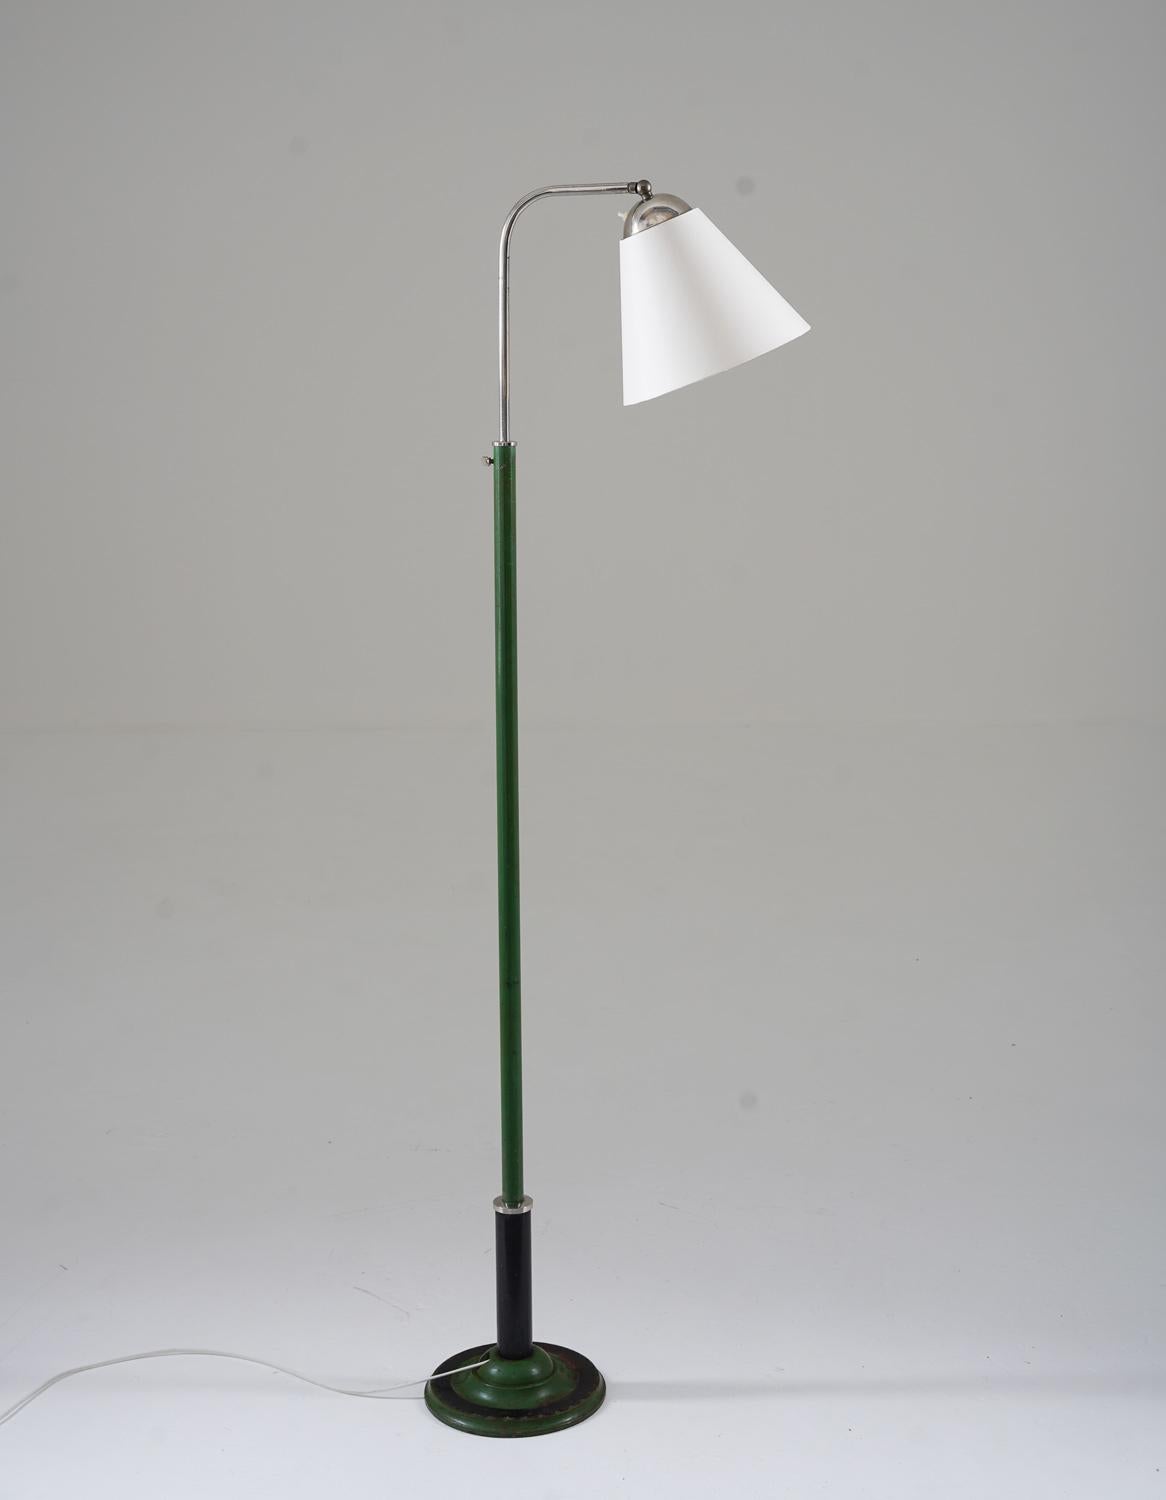 132-180
Lovely early functionalistic floor lamp manufactured in Sweden, 1930s. 
The lamp consists of a green and black iron base, supporting a chrome swivel arm that holds the shade. 
Height is adjustable between 132-180cm (60-70.8”)

Condition: